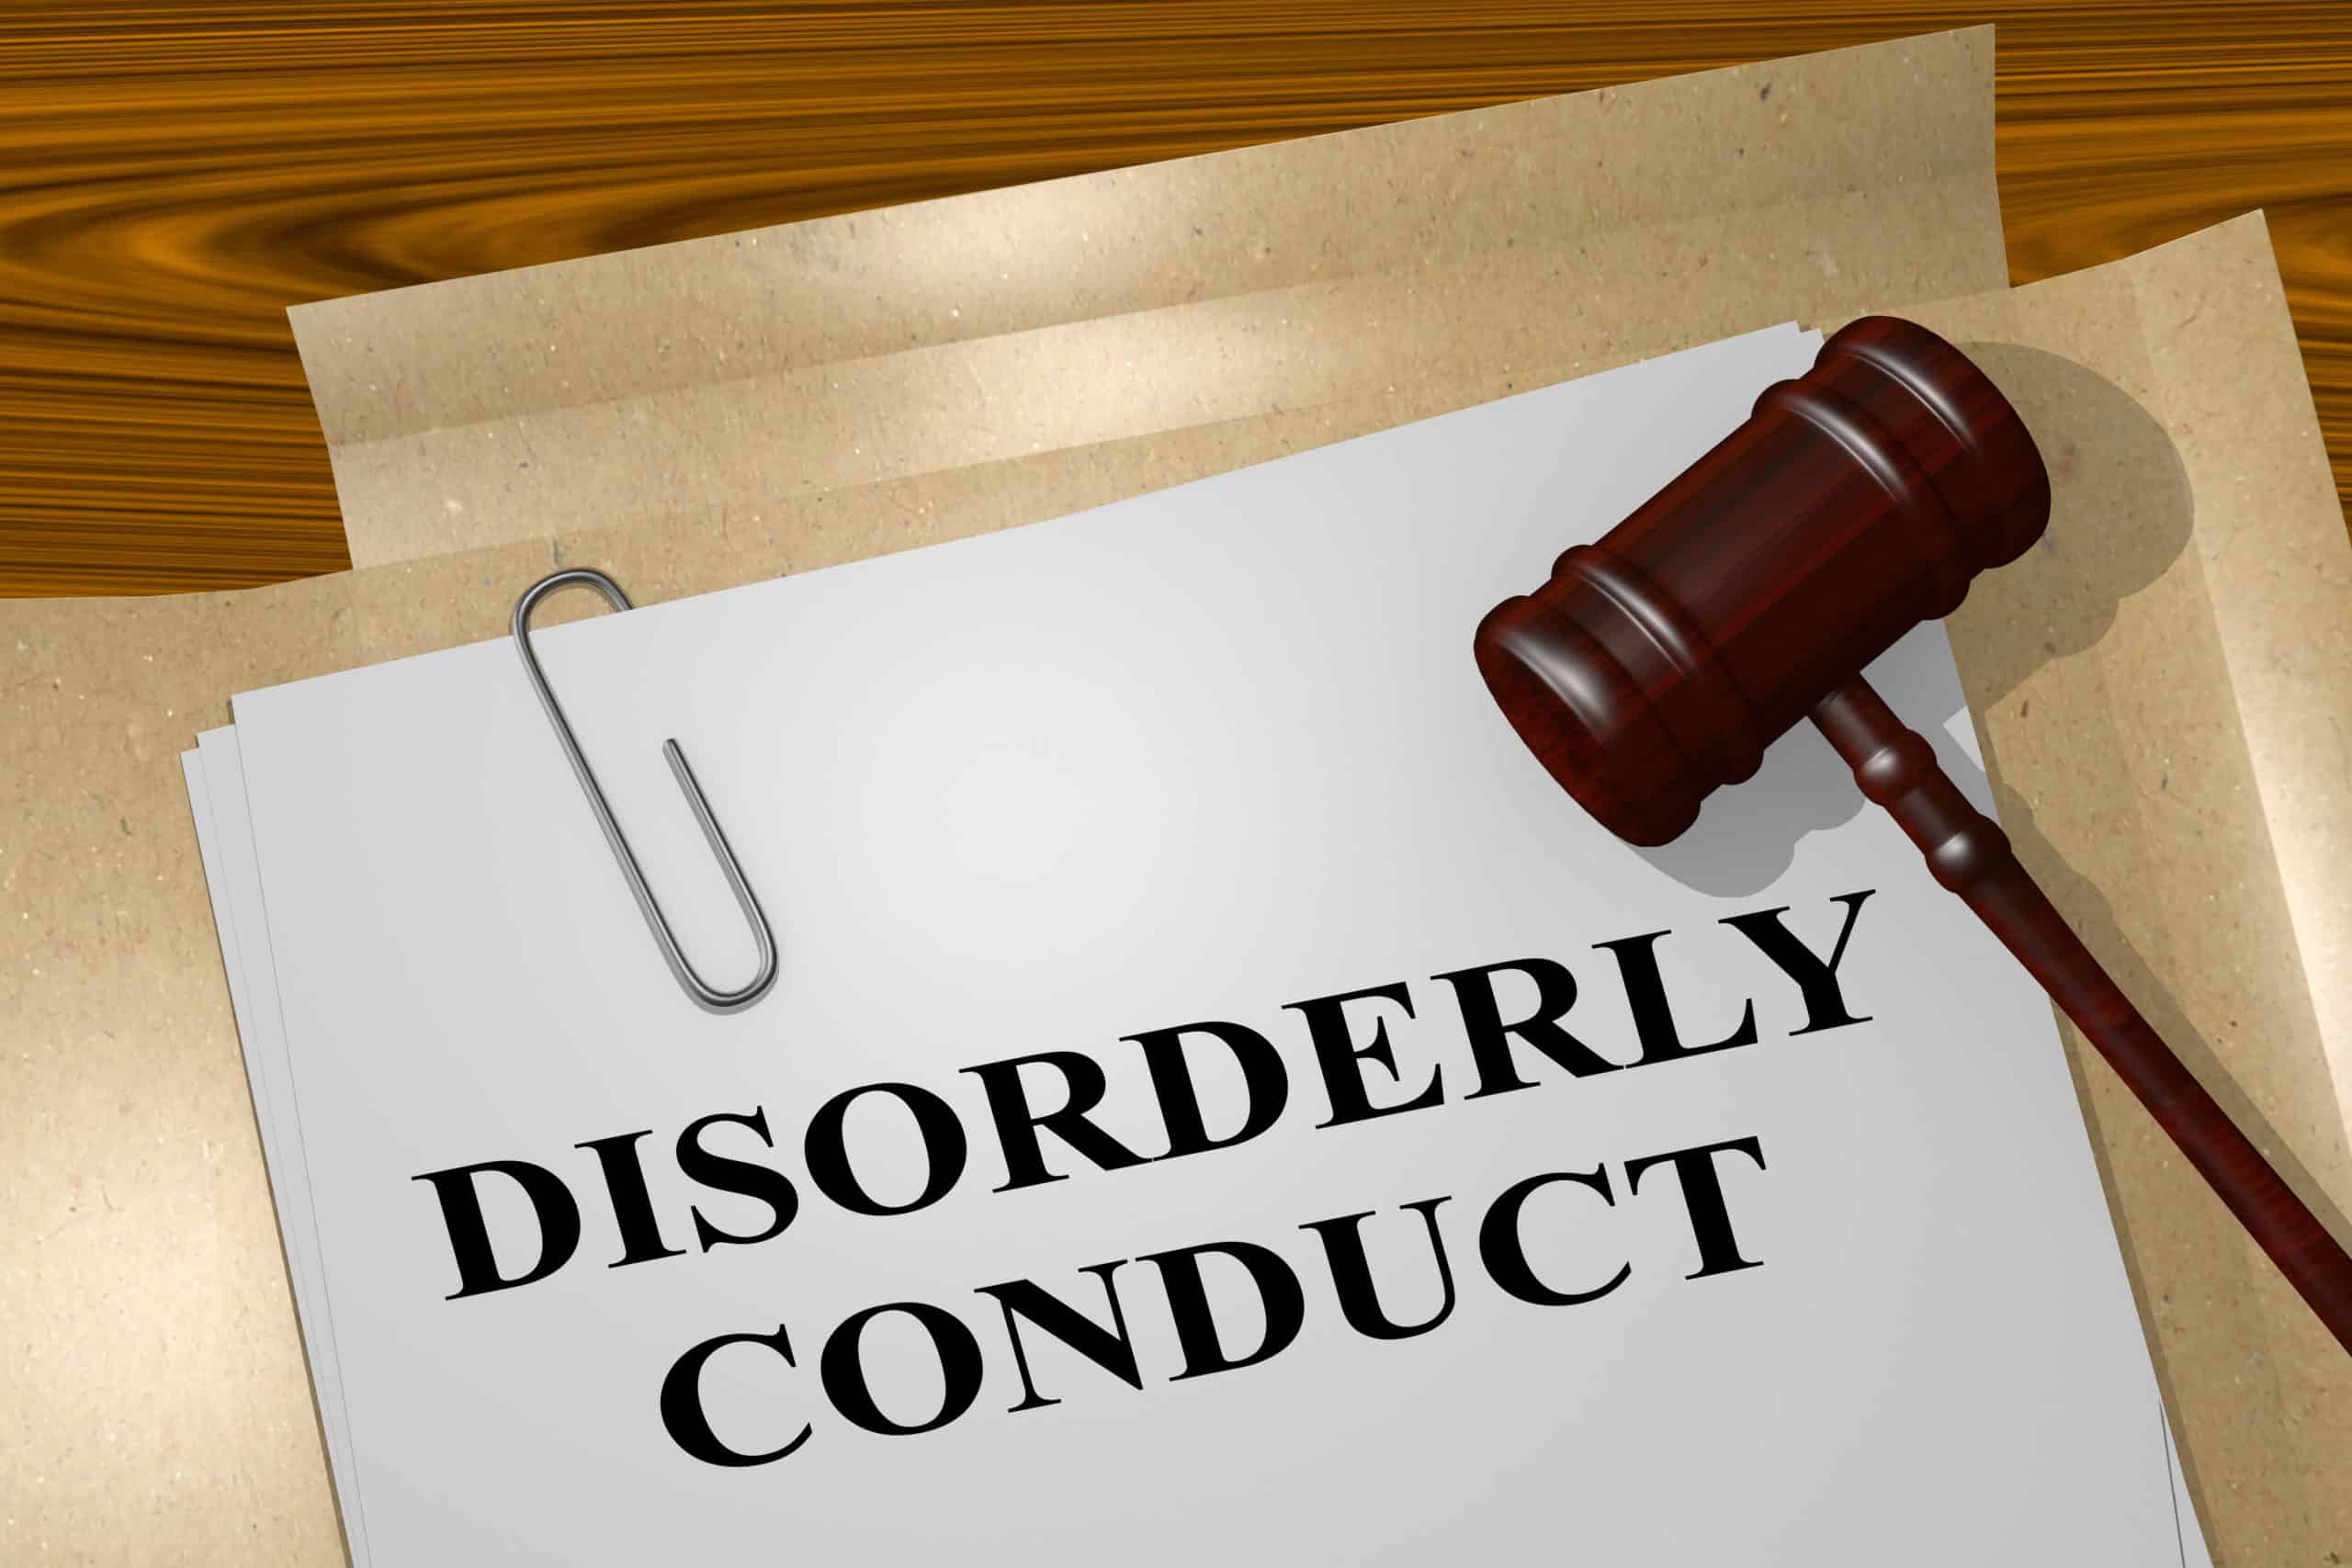 Busted for Disorderly Conduct? Knowing Your Rights to Avoid Illegal Search and Seizure (Florida Case Study)